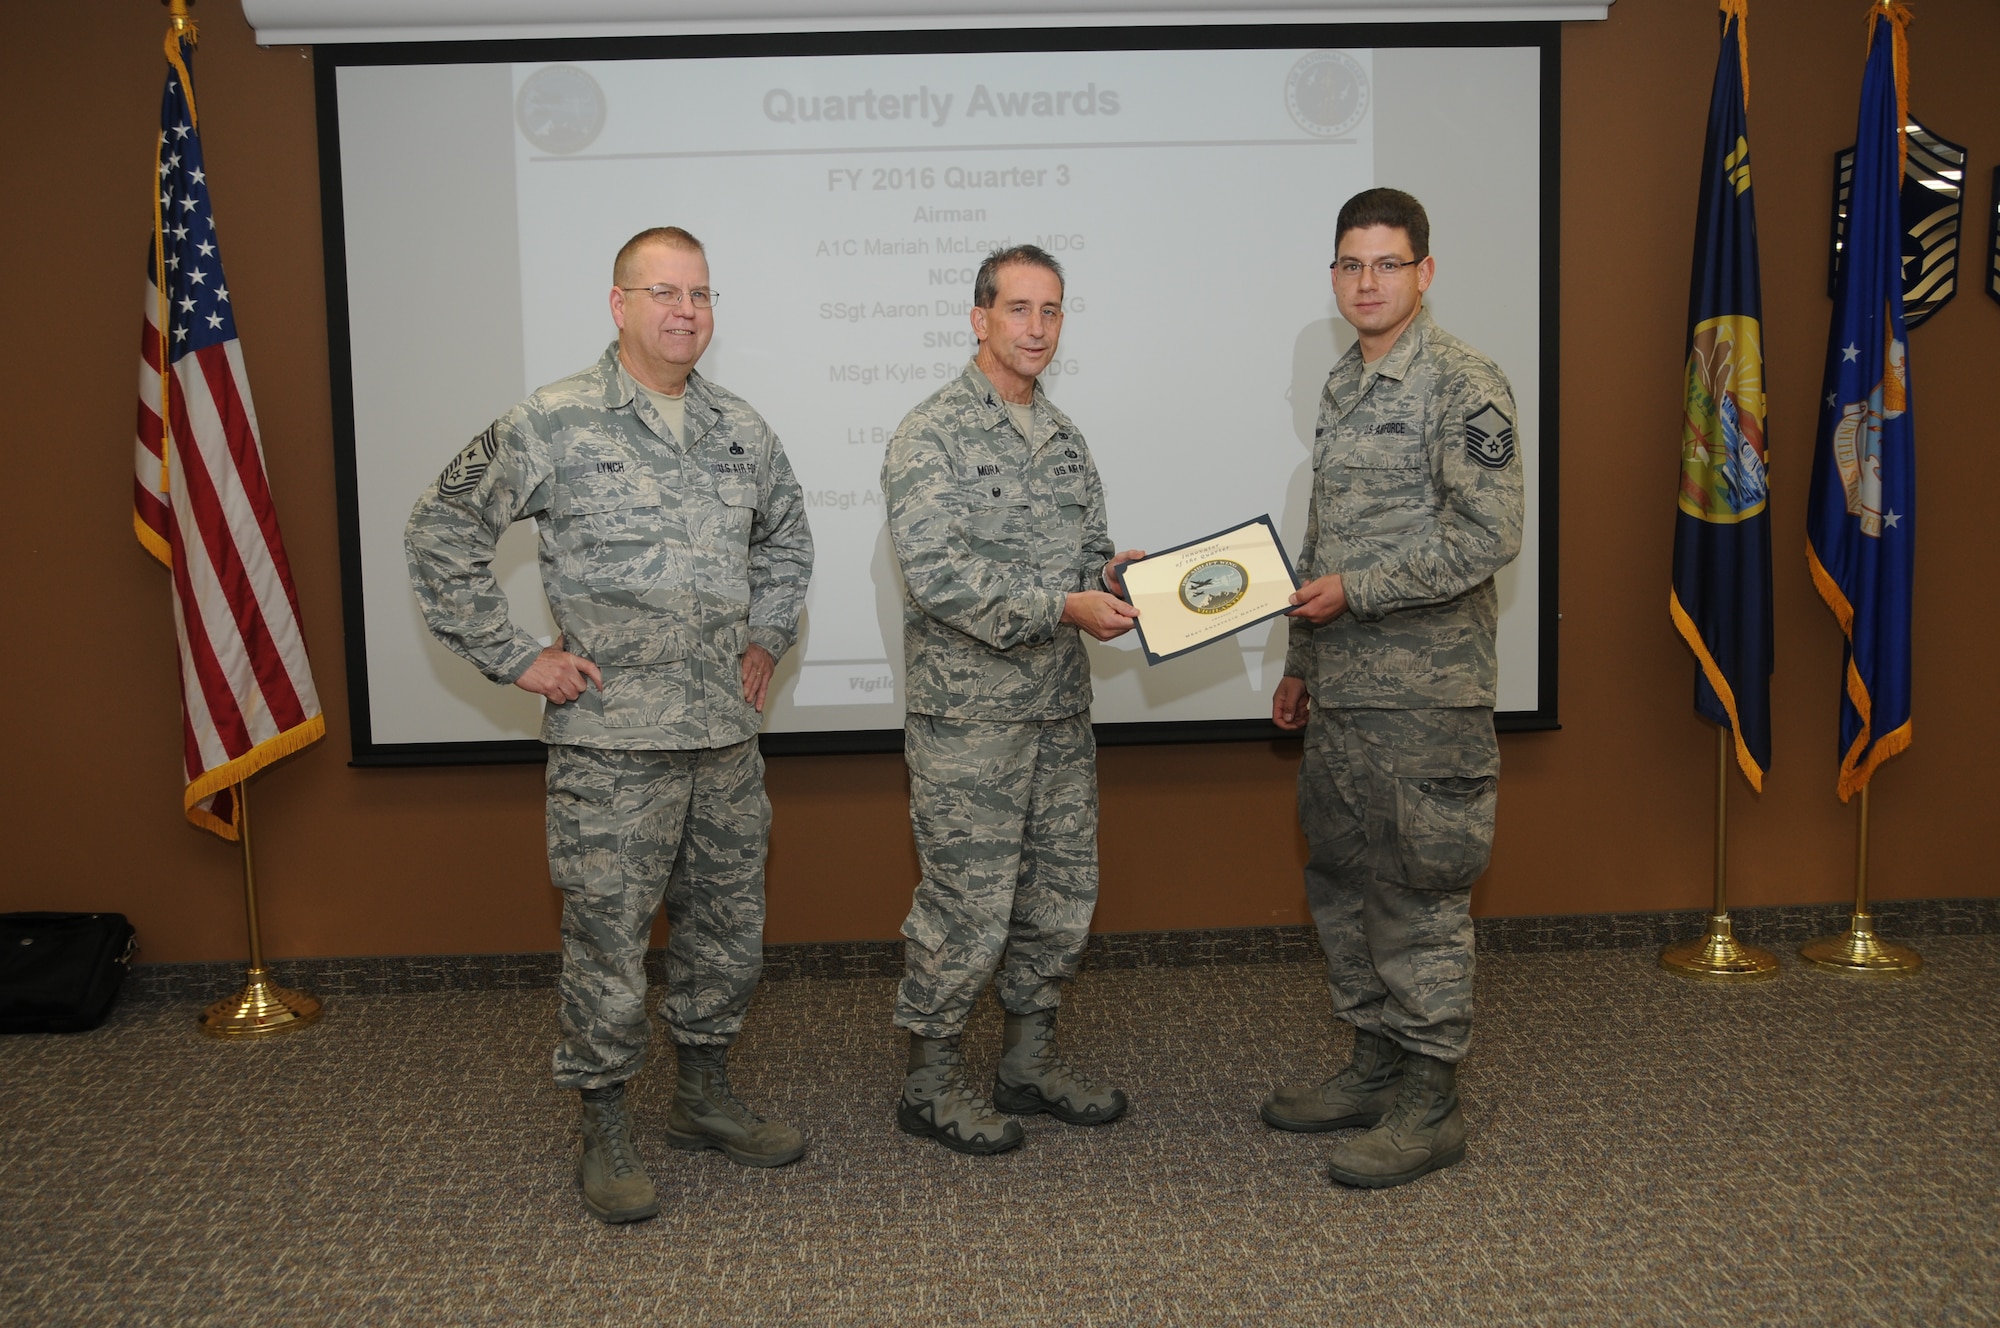 120th Airlift Wing Vice Commander Col. Thomas Mora and 120th AW Command Chief Master Sgt. Steven Lynch presented the Fiscal Year 2016 3rd quarter award winners for the 120th Airlift Wing of the Montana Air National Guard during the Stand-up Briefing held in the Larsen Room of the wing headquarters building Nov. 4, 2016. Master Sgt. Anastacio Navarro, an airlift aircraft maintenance craftsman assigned to the 120th Maintenance Group, was awarded the Innovator of the Quarter Award.